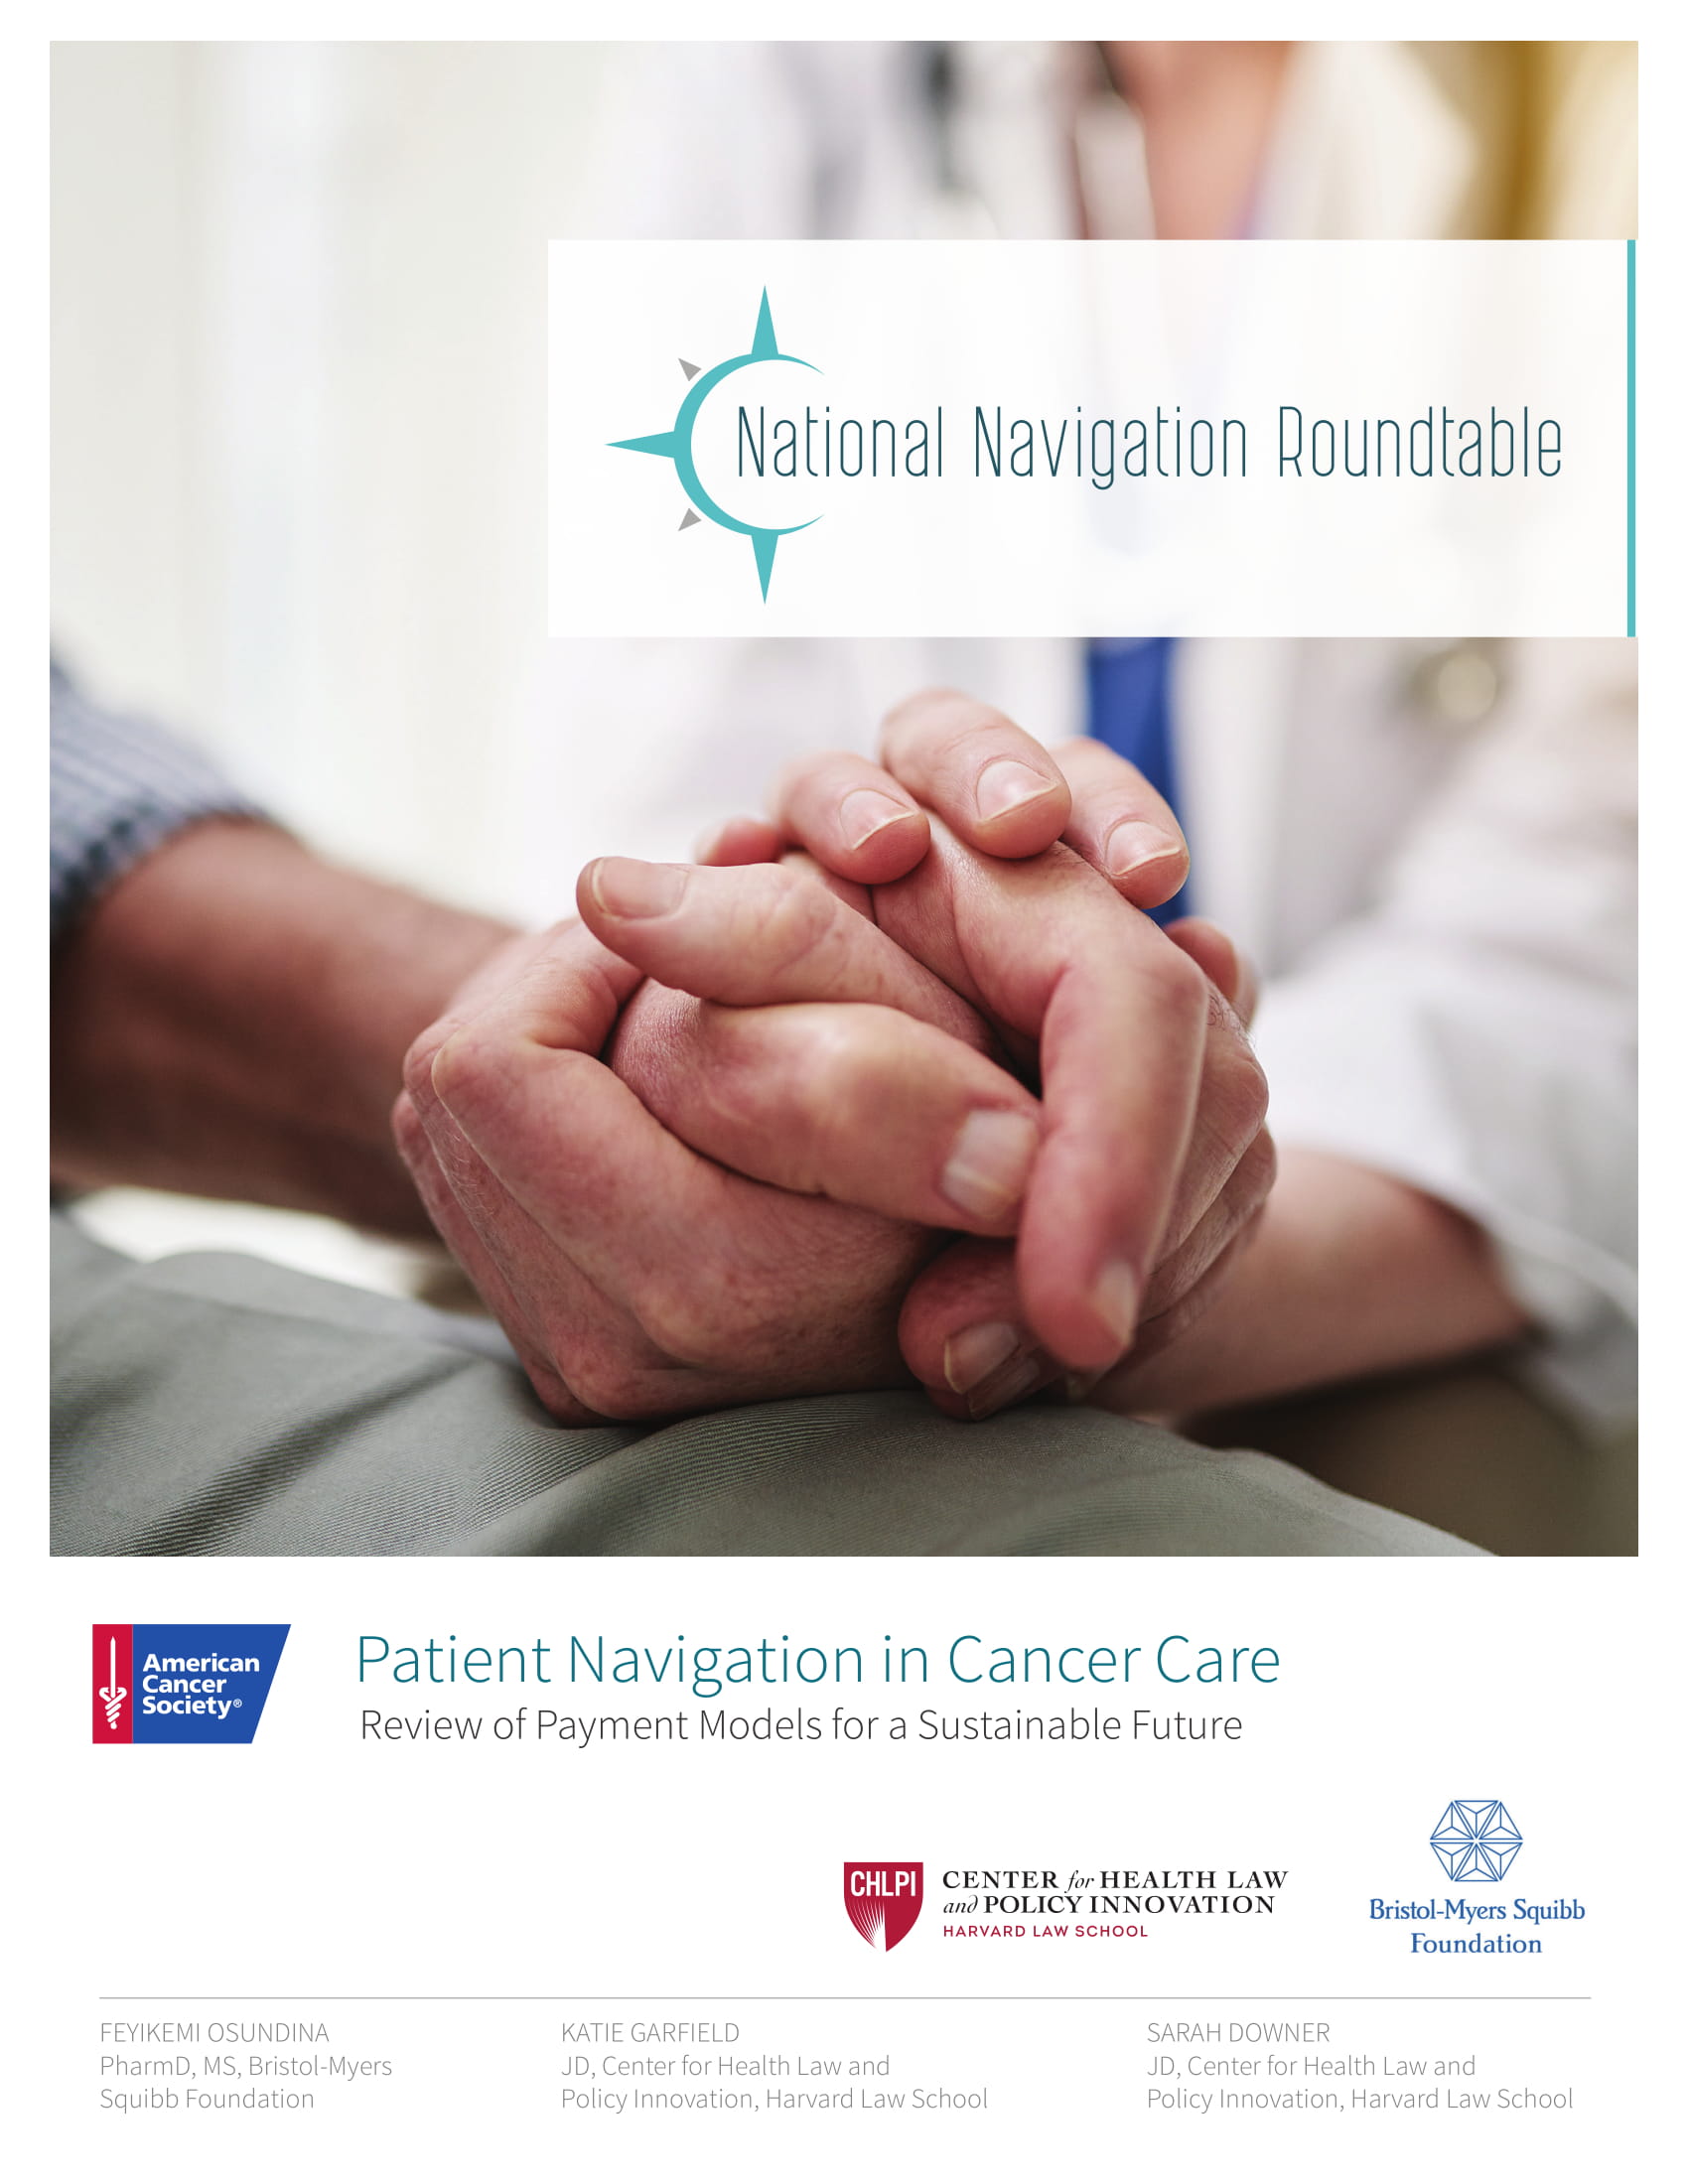 Patient Navigation in Cancer Care – A Review of Payment Models for a Sustainable Future